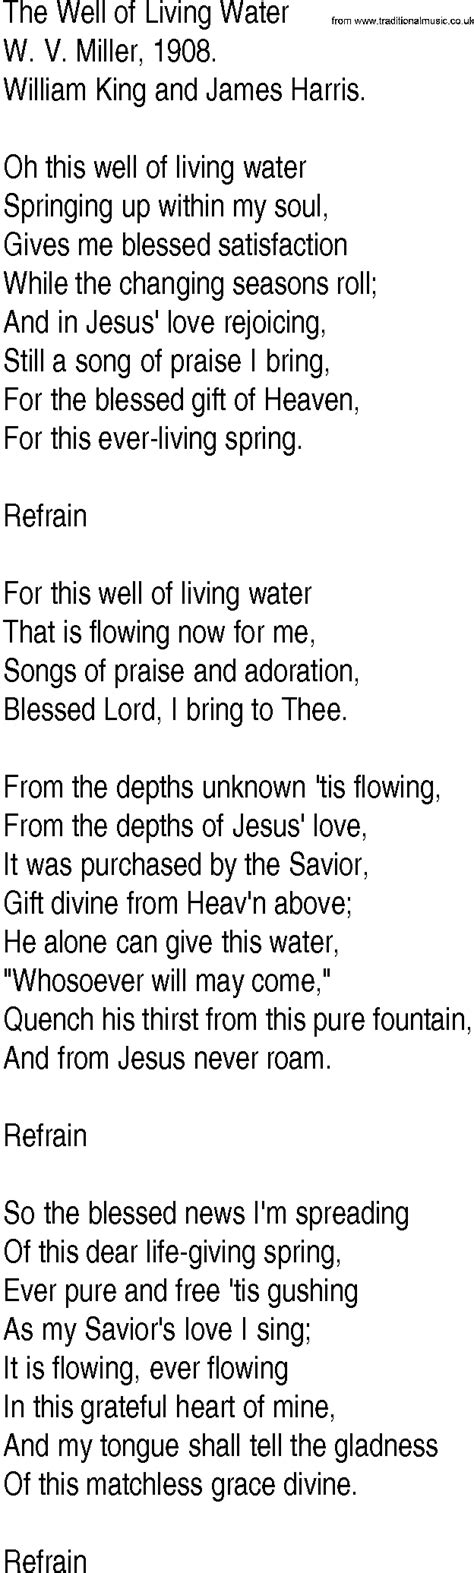 Hymn And Gospel Song Lyrics For The Well Of Living Water By W V Miller